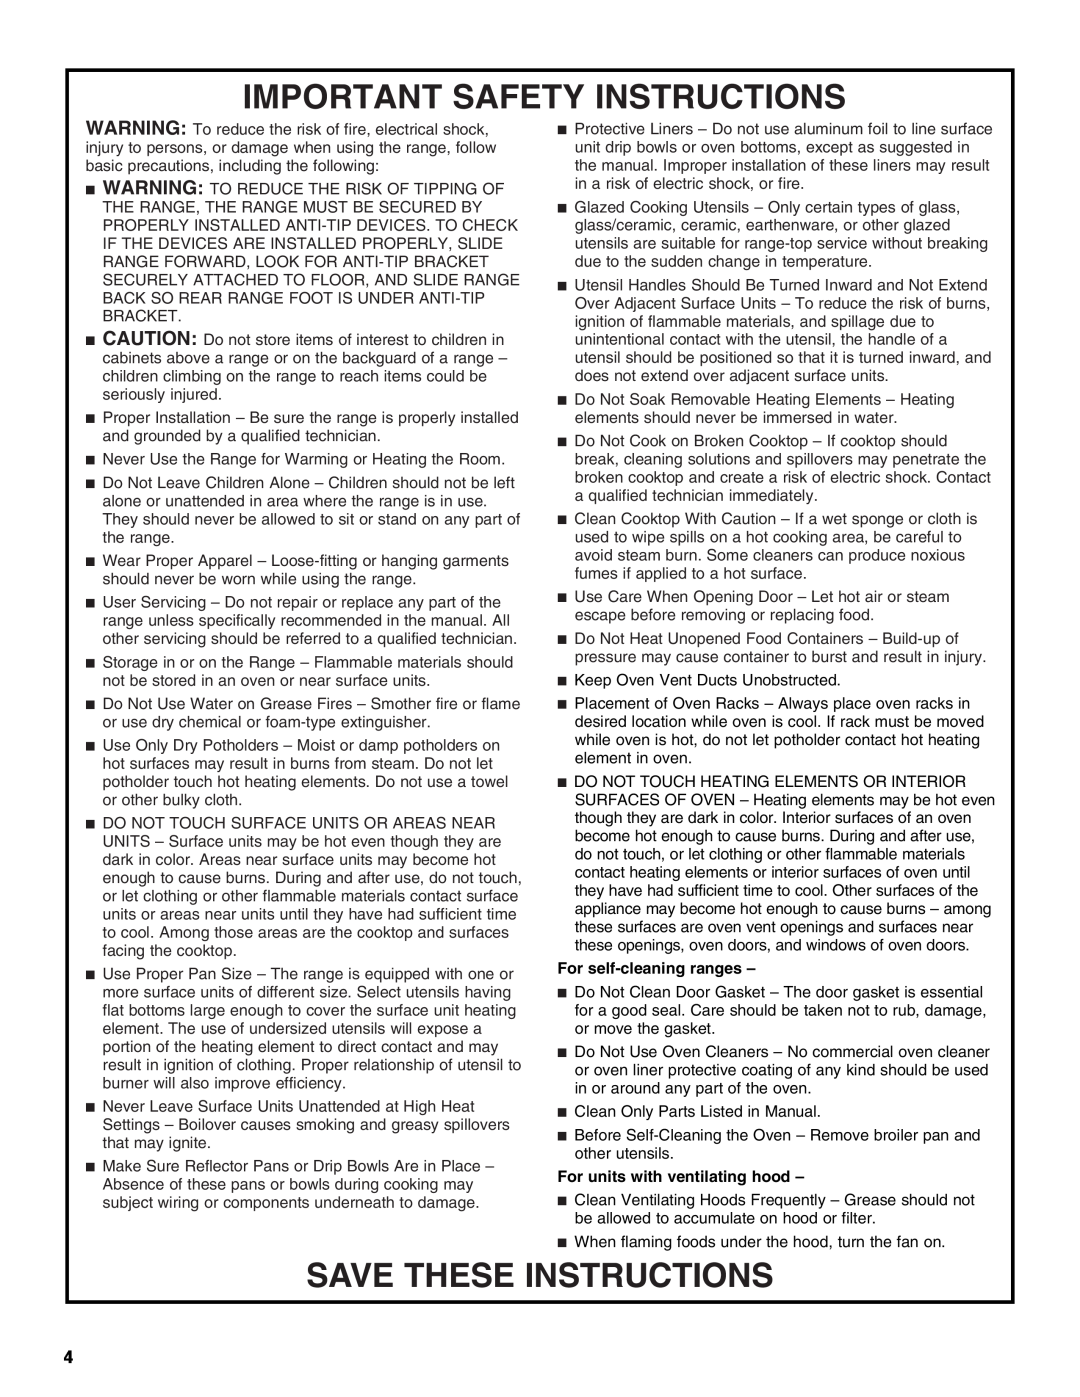 Whirlpool FEP310KN1 manual Important Safety Instructions, Save These Instructions, For self-cleaningranges 